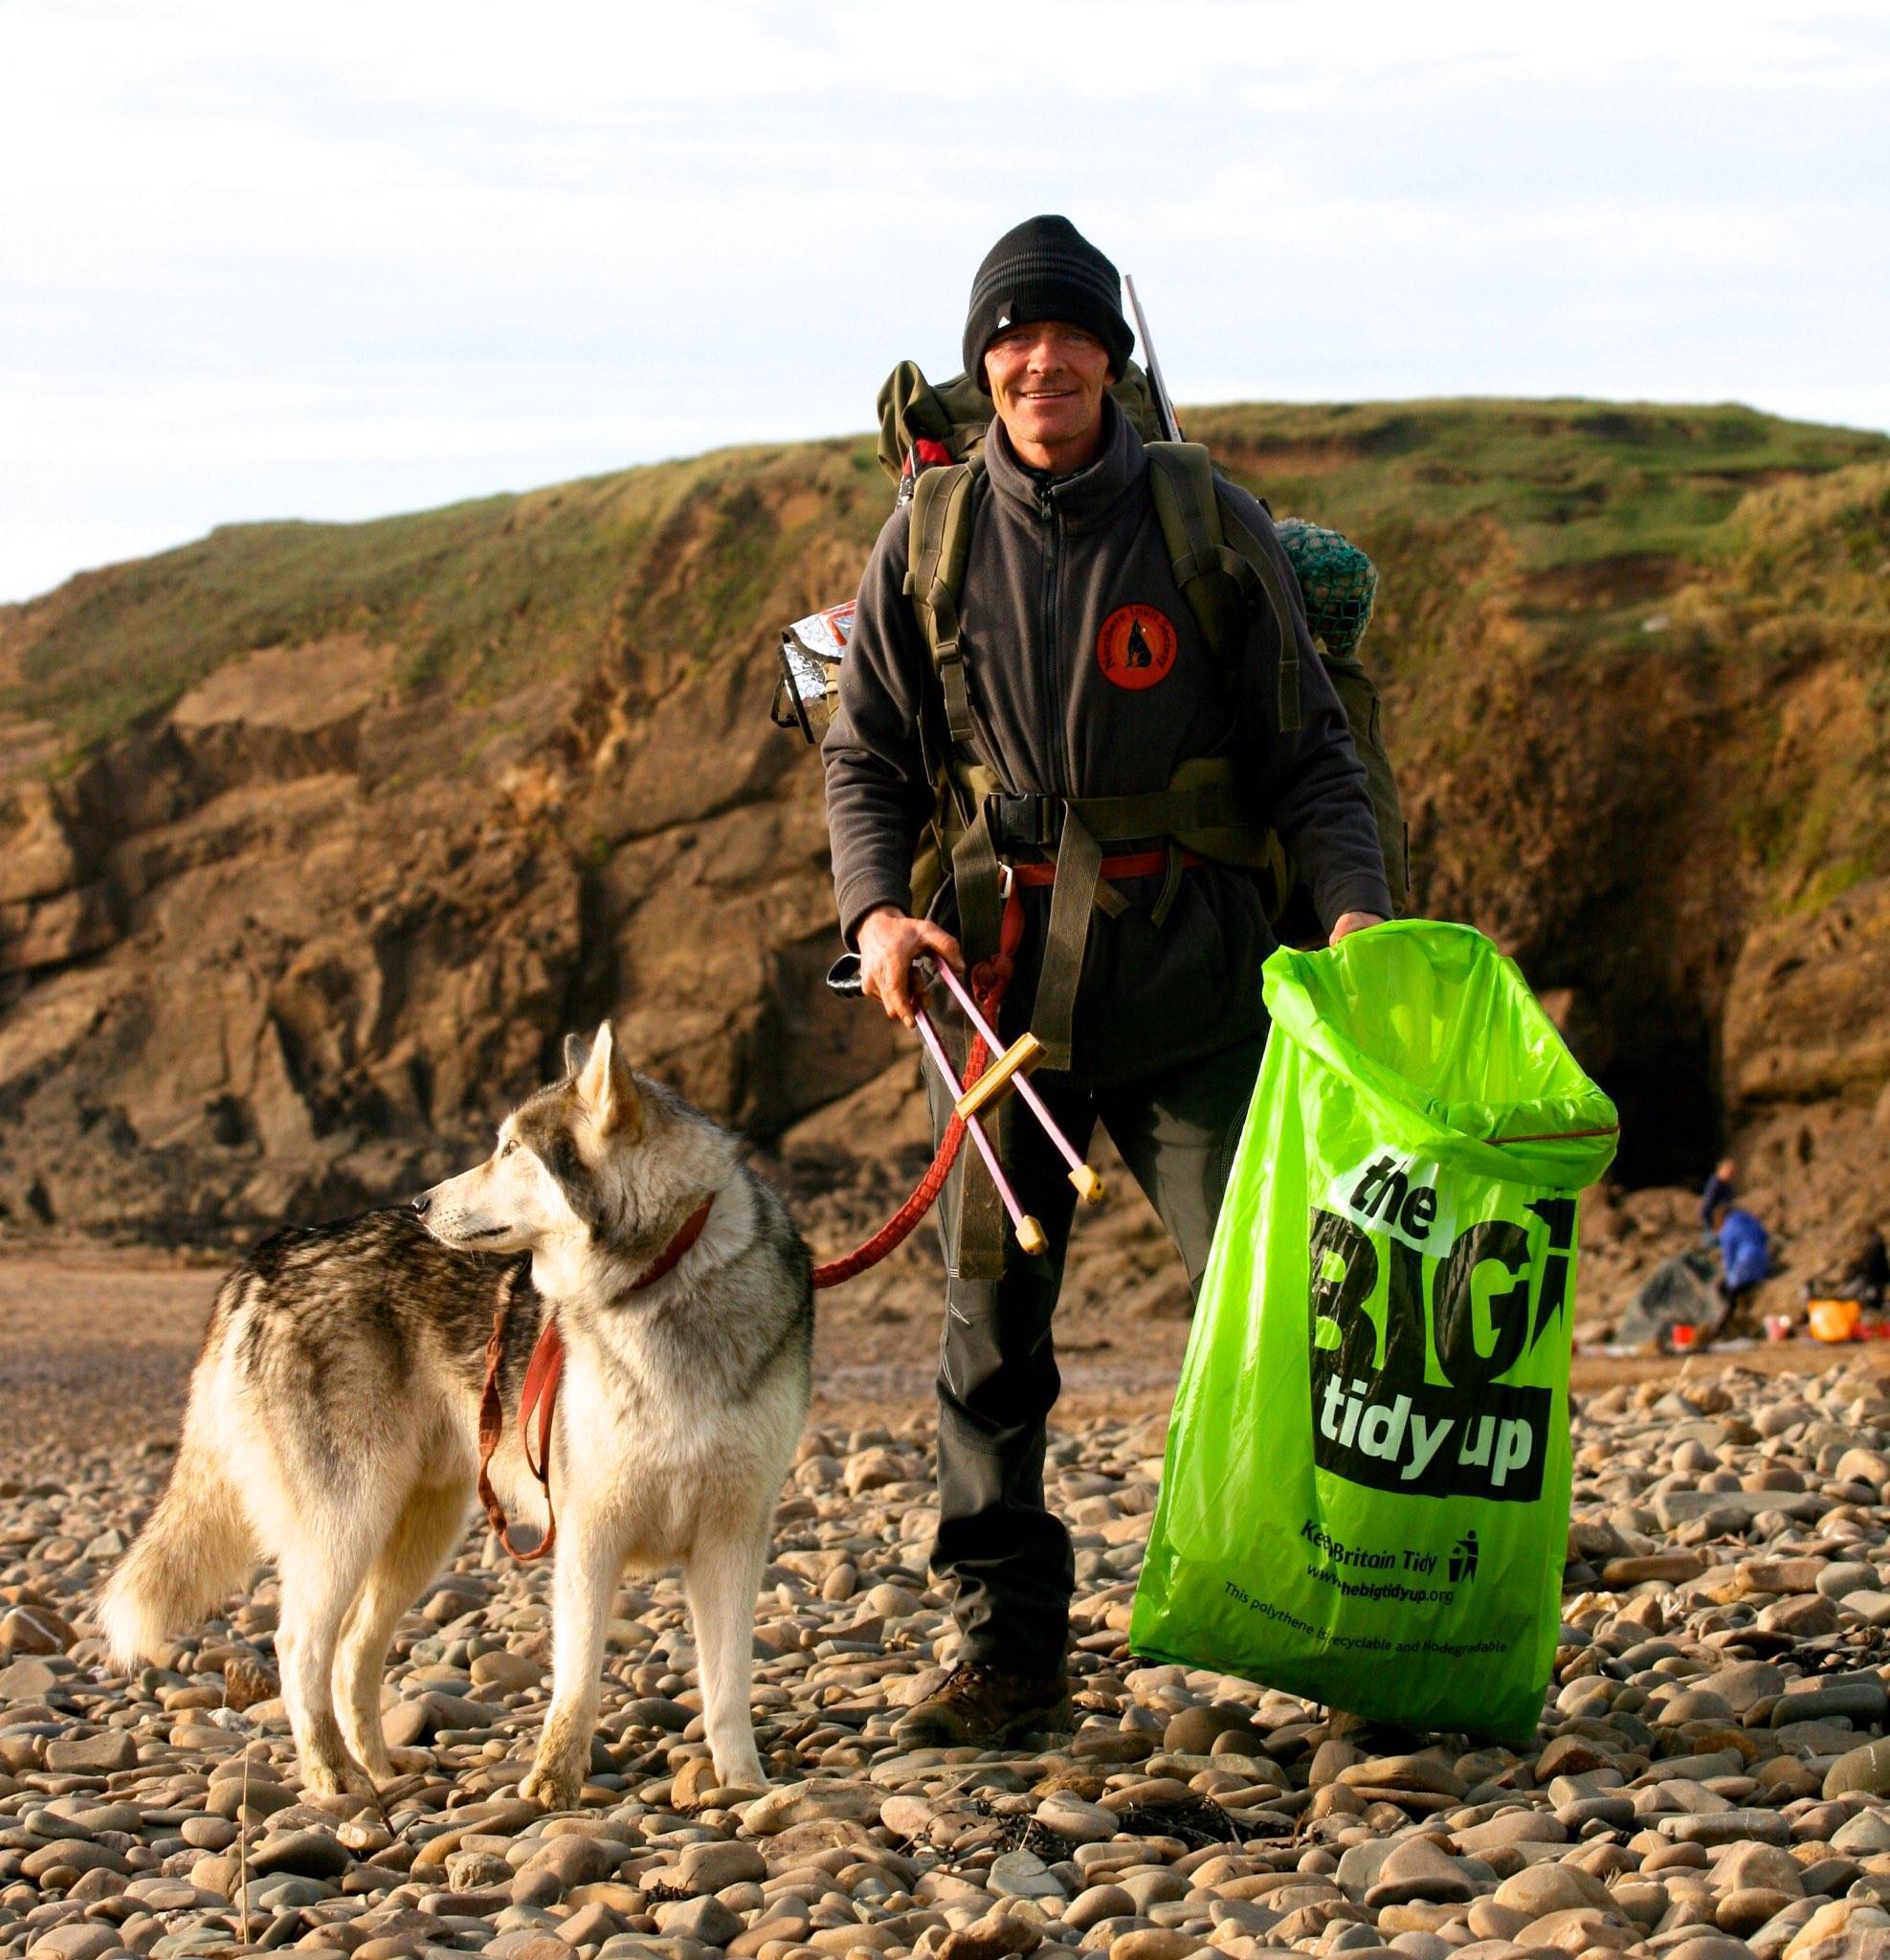 Keep Britain Tidy ambassador, Wayne Dixon and his dog, Koda, who are taking part in the Great British Spring Clean